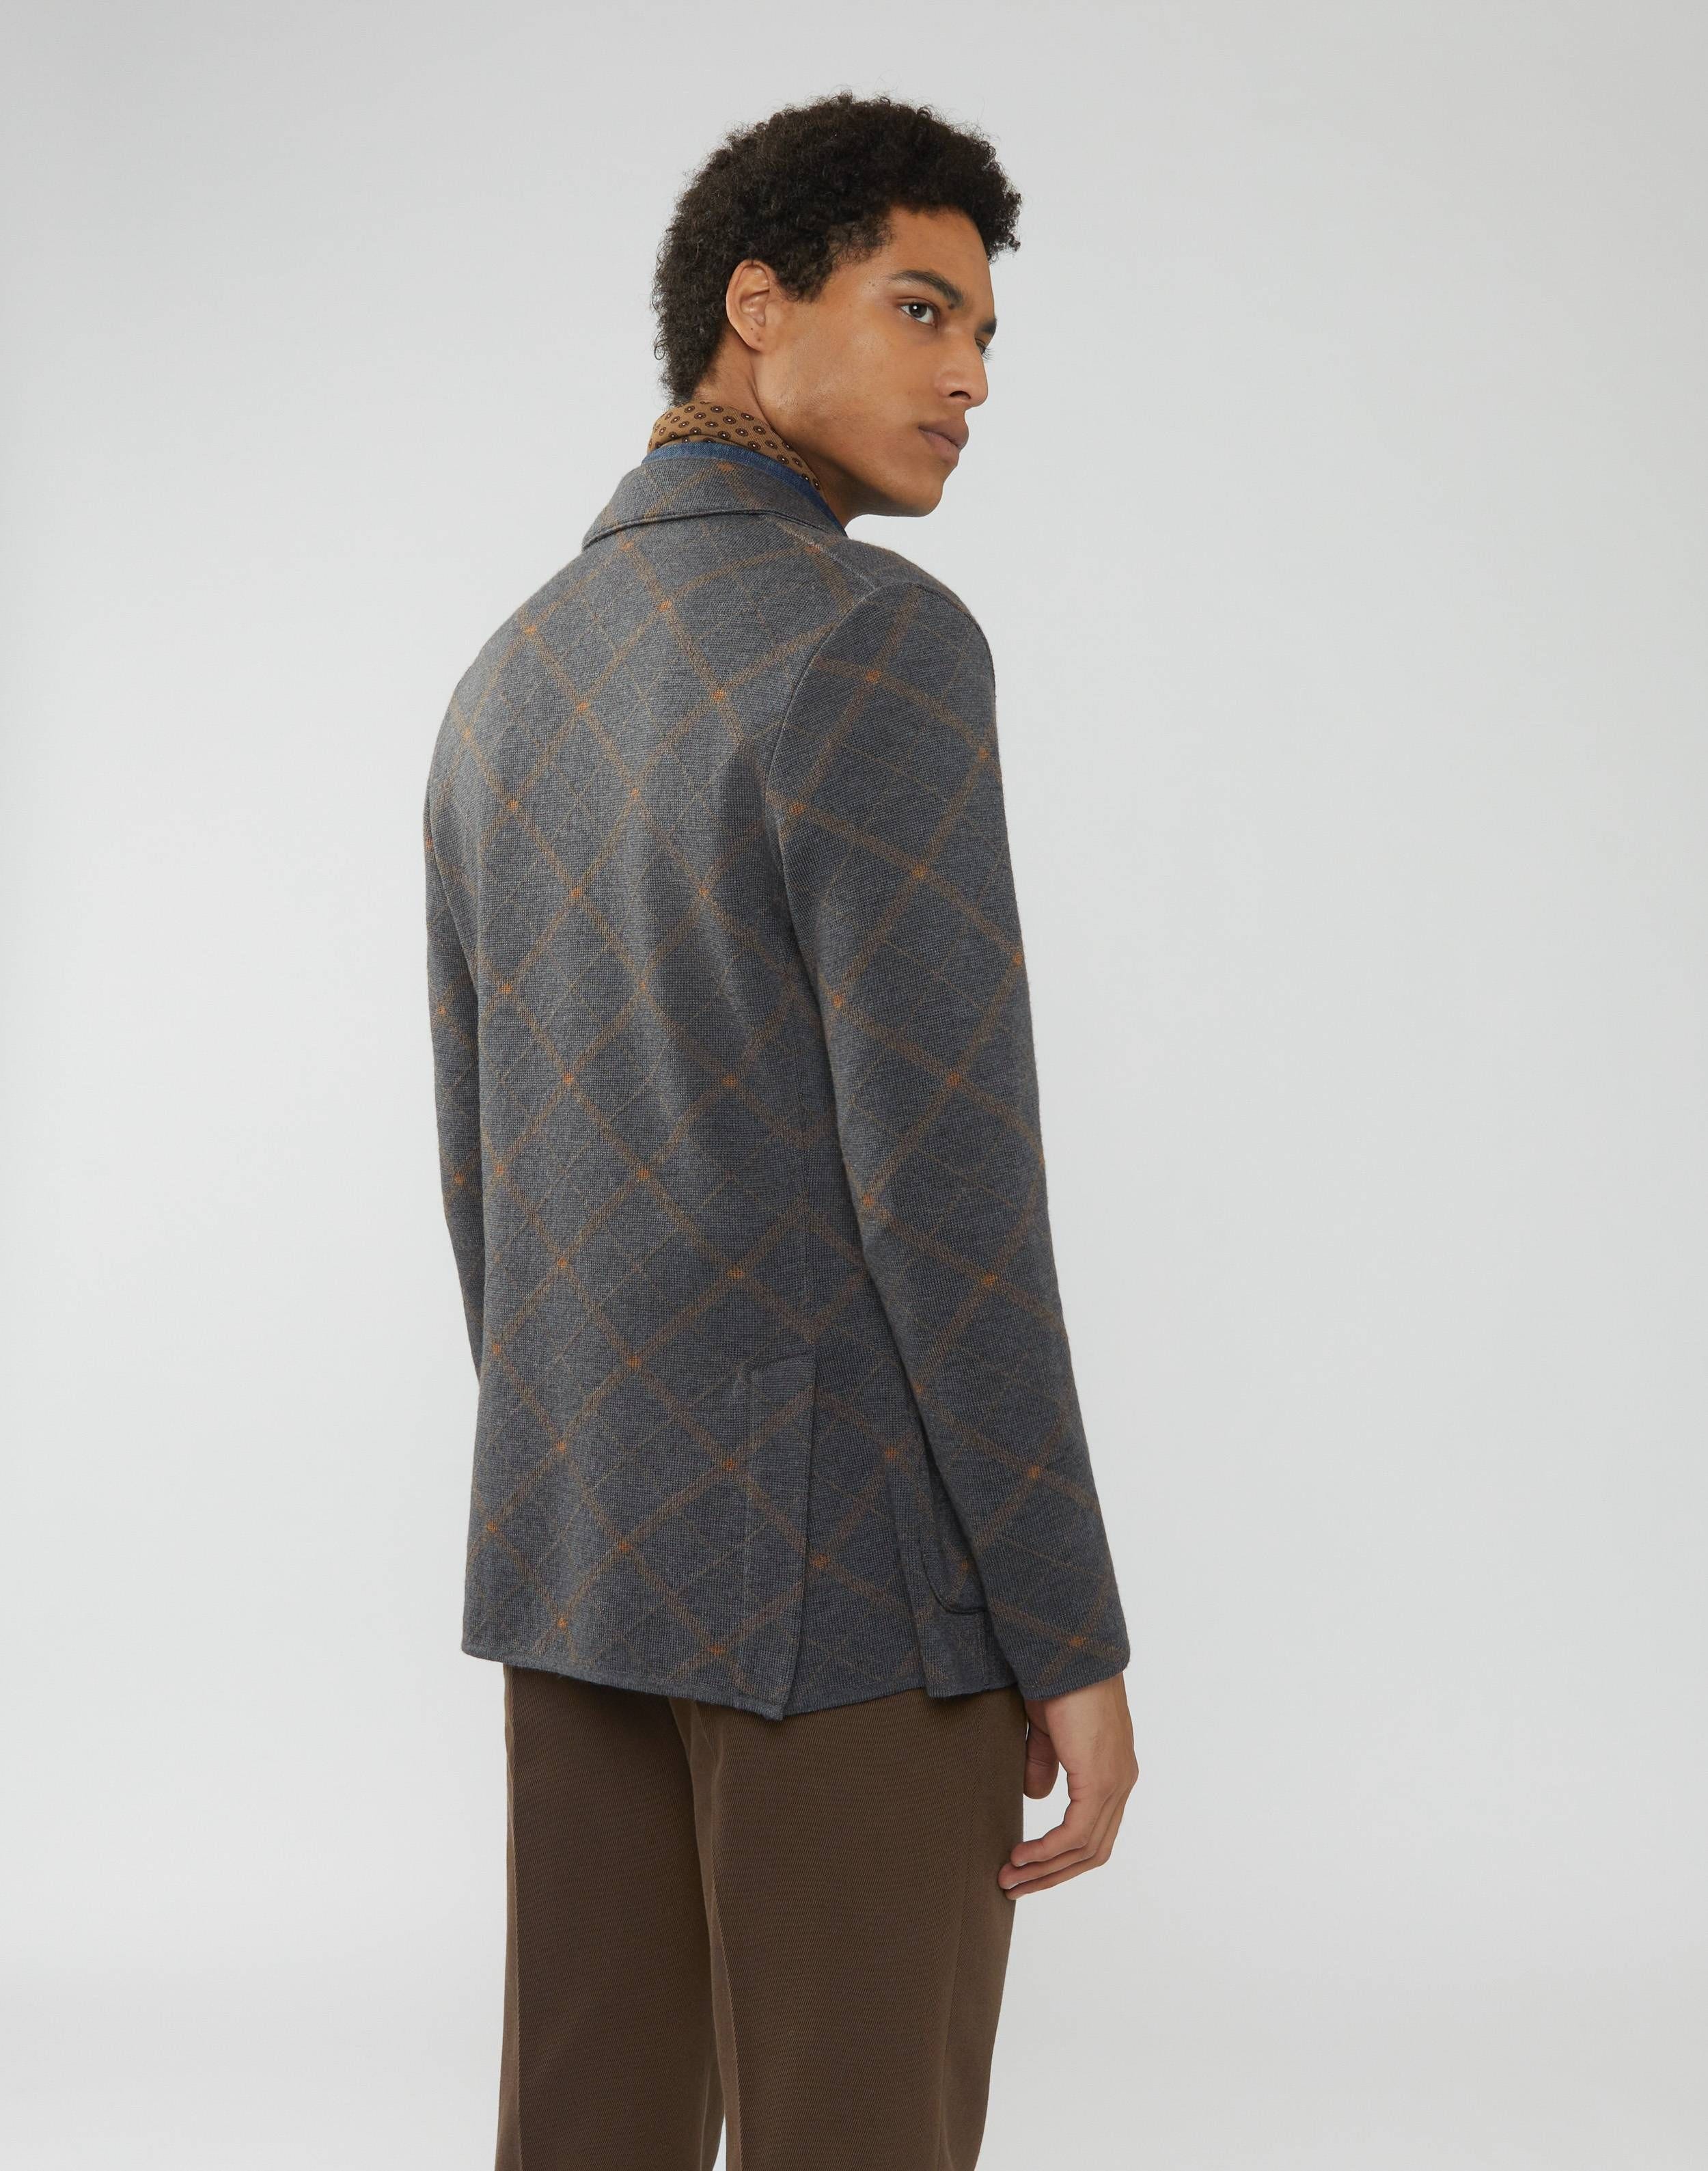 Knitted jacket in a grey-and-beige diamond pattern